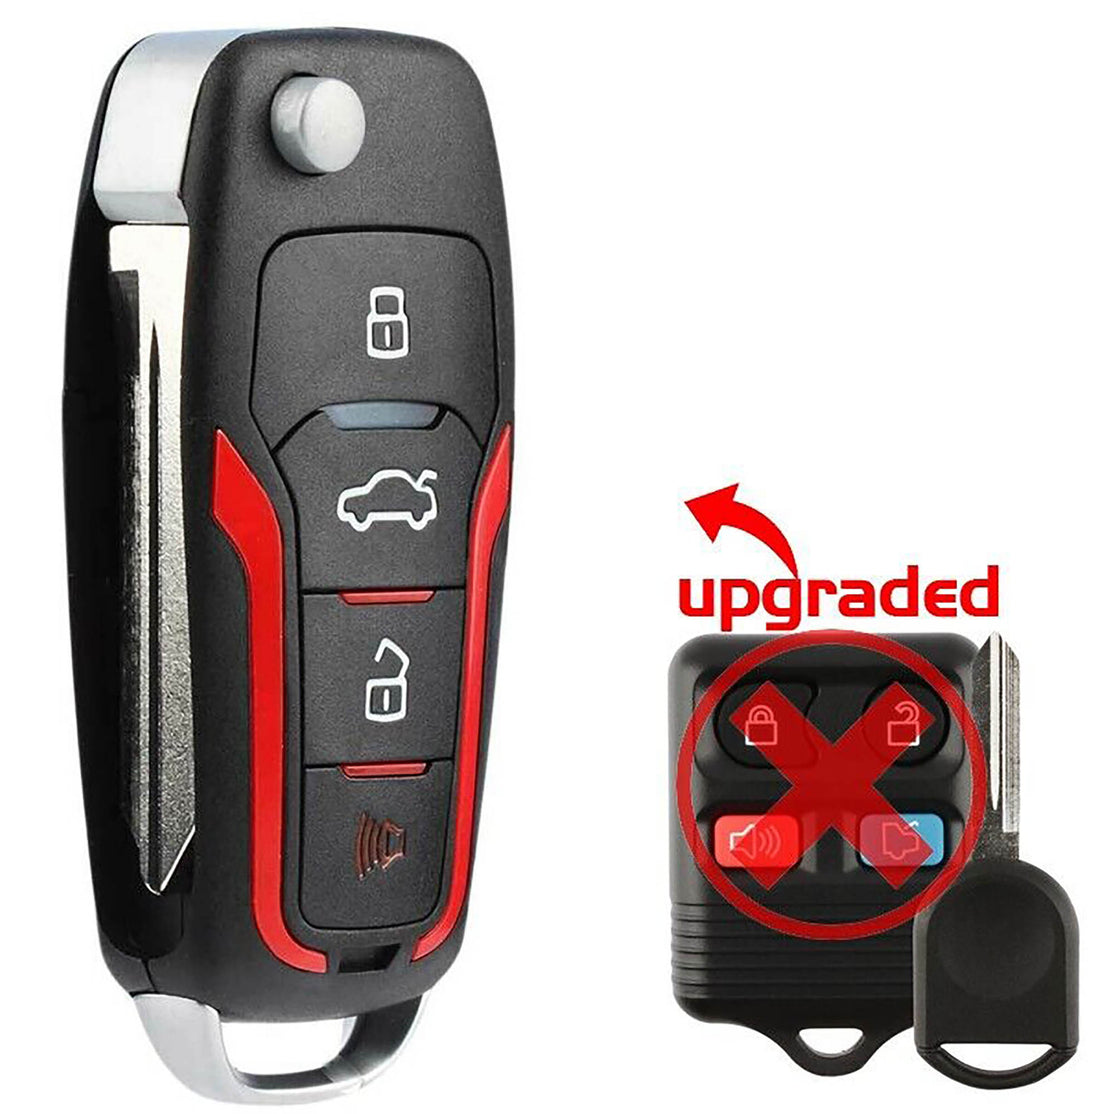 1x New Replacement Remote Key Fob Compatible with & Fit For Ford Lincoln Mercury Mazda Vehicles - MPN CWTWB1U345-04